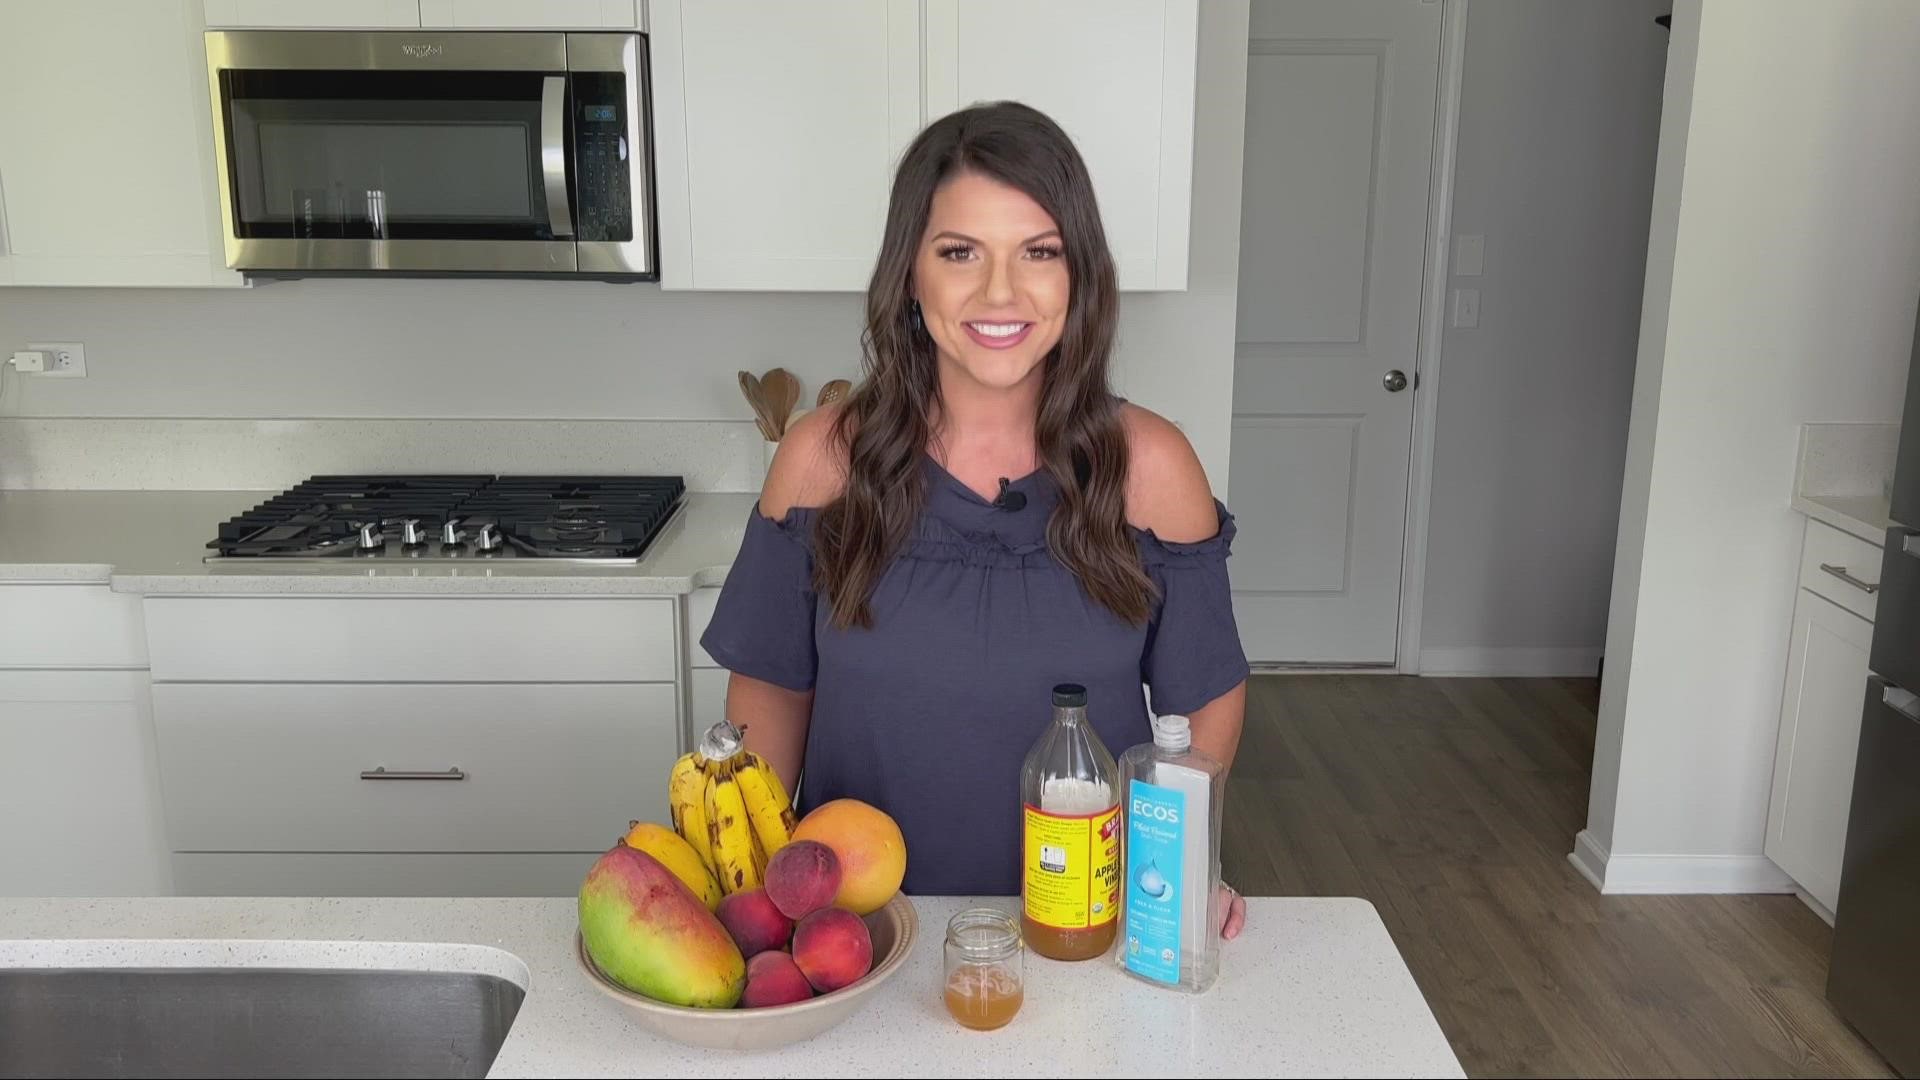 Megan Evans reveals a hack to get rid of gnats and fruit flies that can be done with just 2 ingredients.